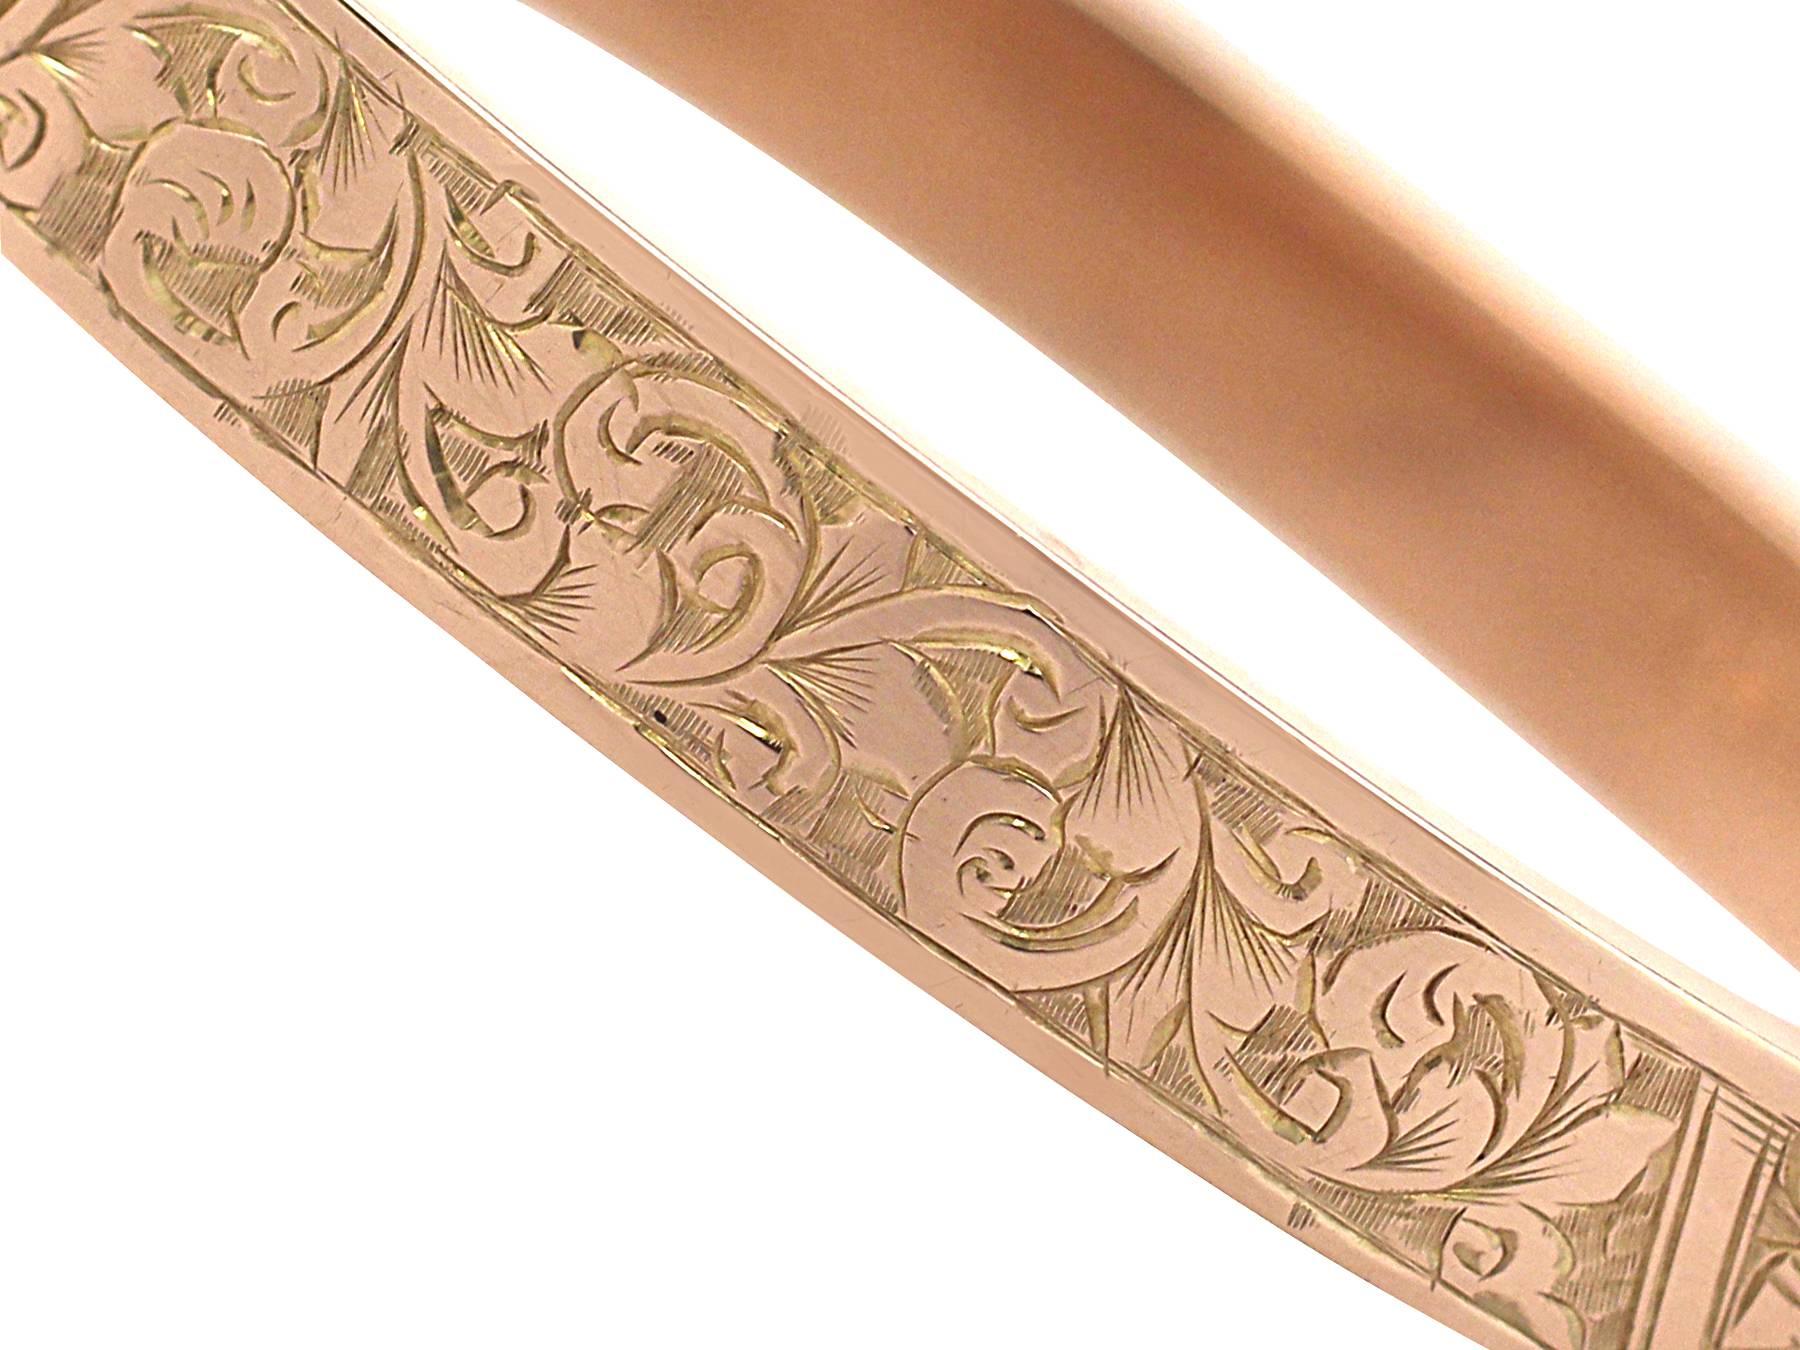 A fine and impressive antique Victorian 9 karat rose gold bangle; part of our diverse antique jewelry and estate jewelry collections

This fine and impressive antique bangle has been crafted in 9k rose gold.

The anterior face of the bangle is